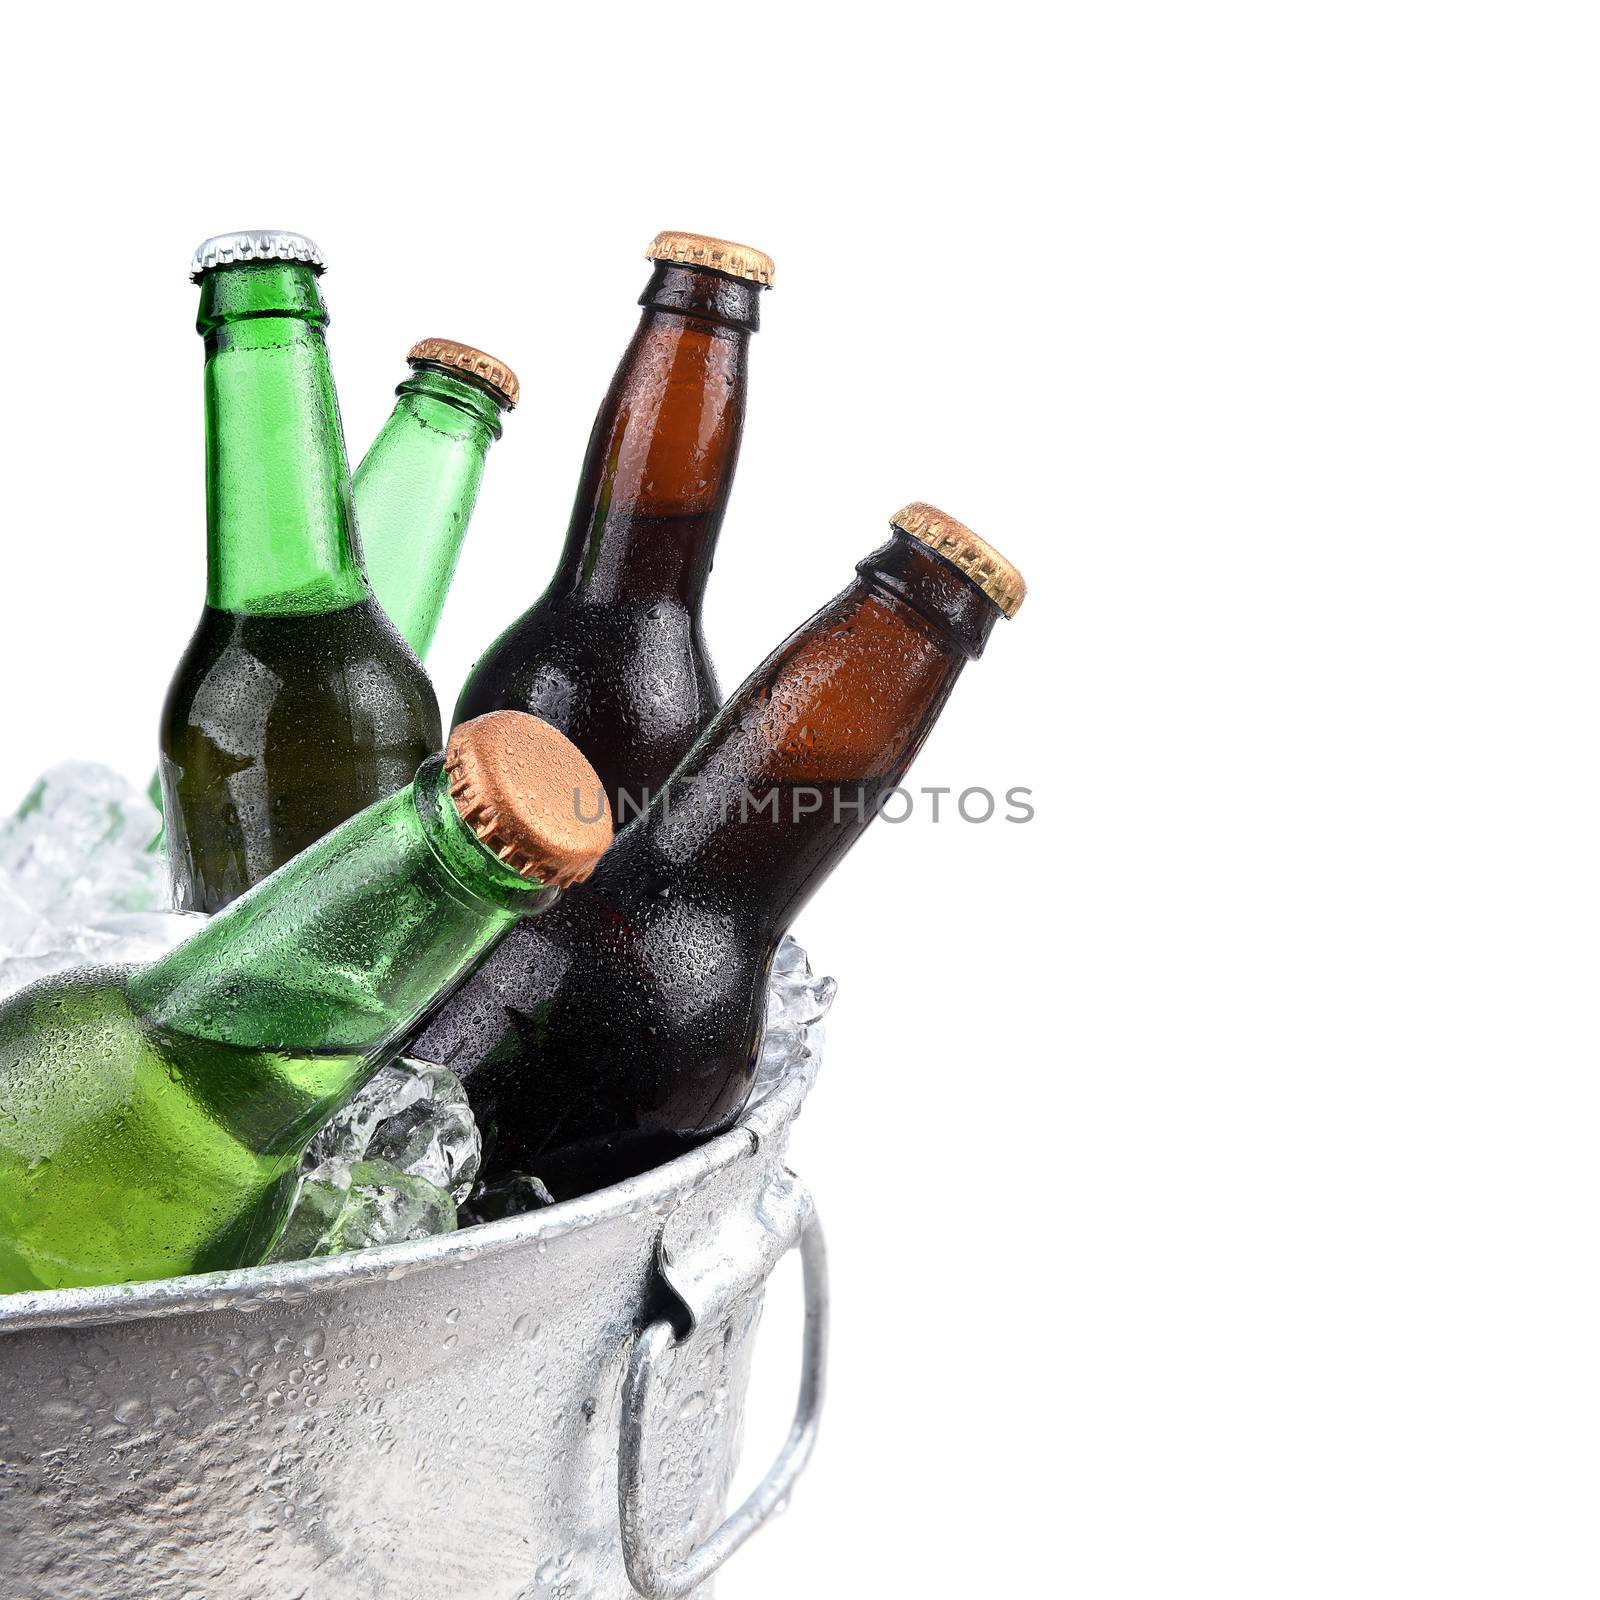 Closeup of green and brown beer bottles in a metal ice bucket, isolated on white.